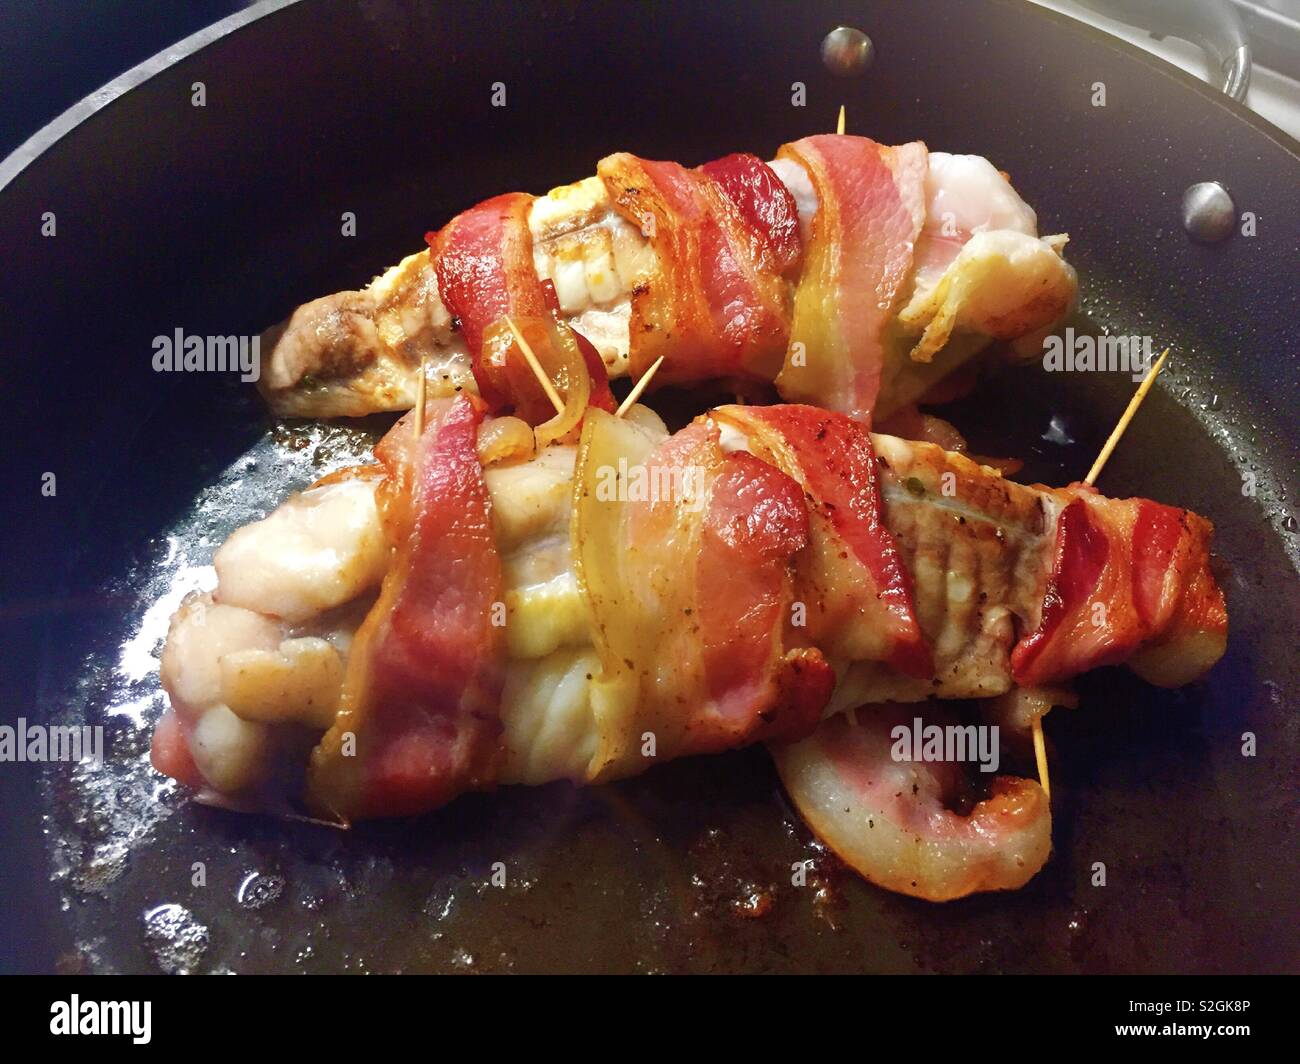 Monk fish fillet wrapped in bacon sautéing in a skillet, USA Stock Photo